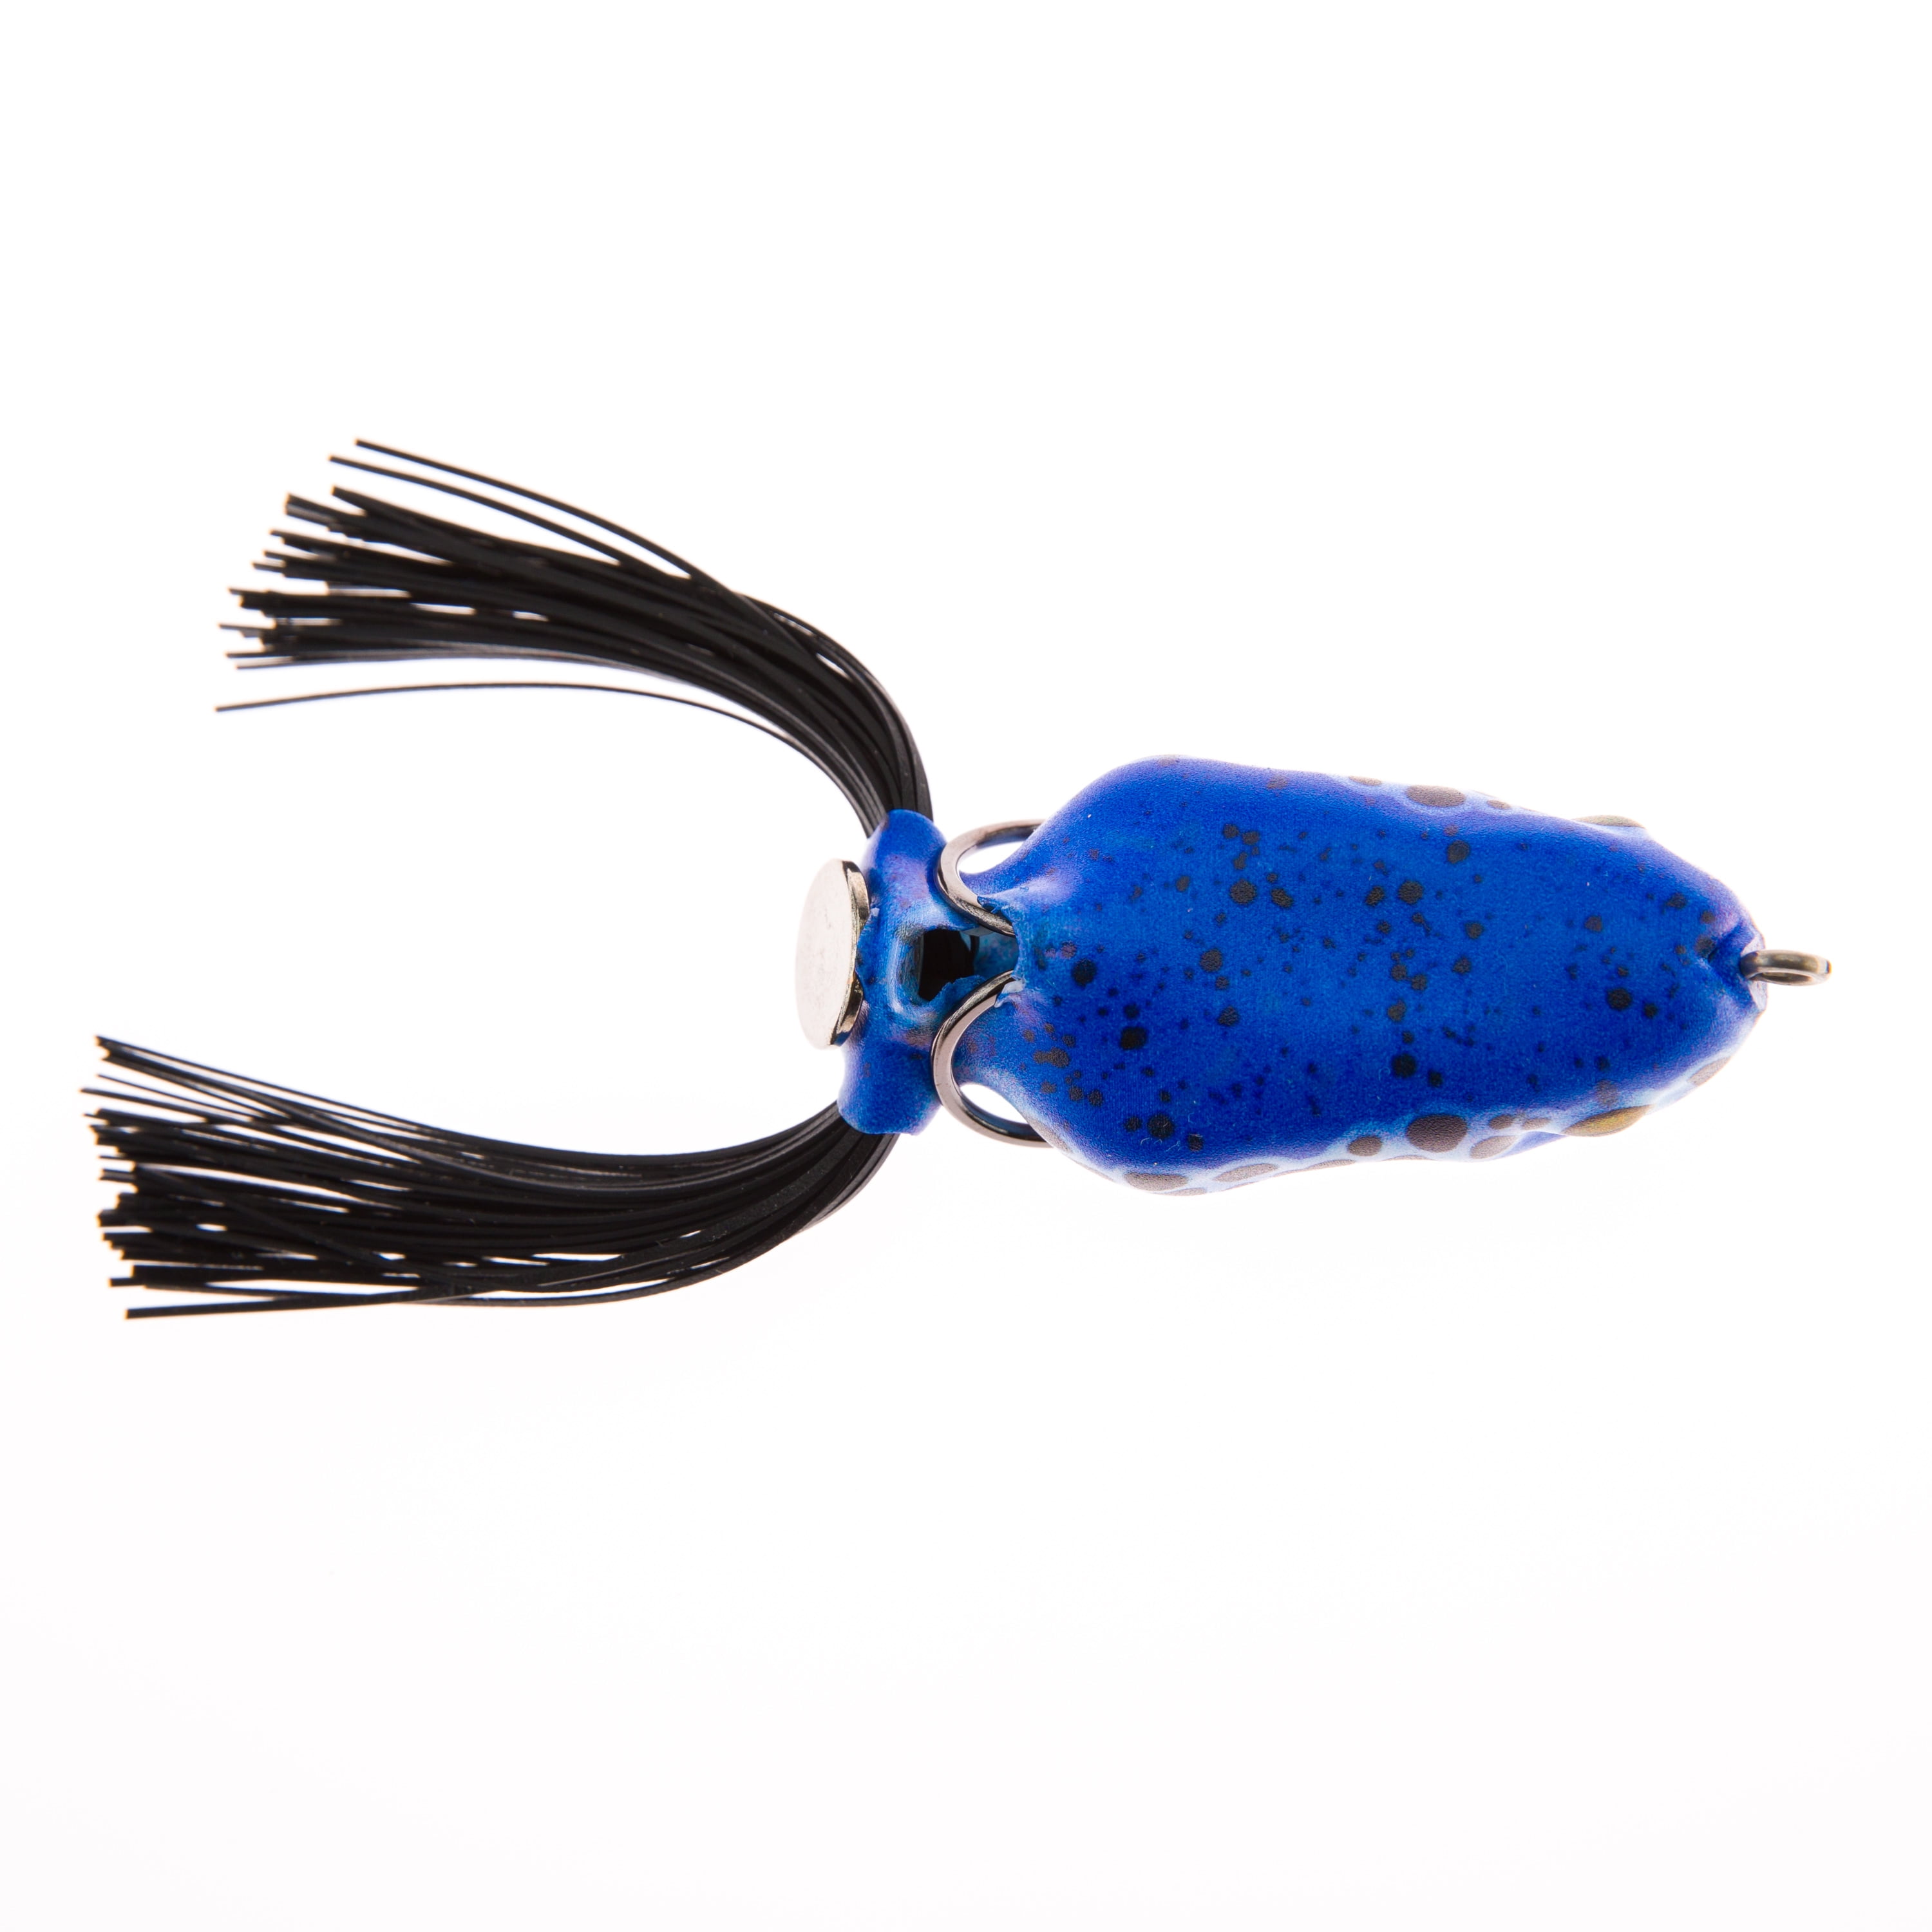 Scum Frog 1/2 oz Painted Trophy Series, Blue Poison, Top Water Hollow Body  Frog Lure 